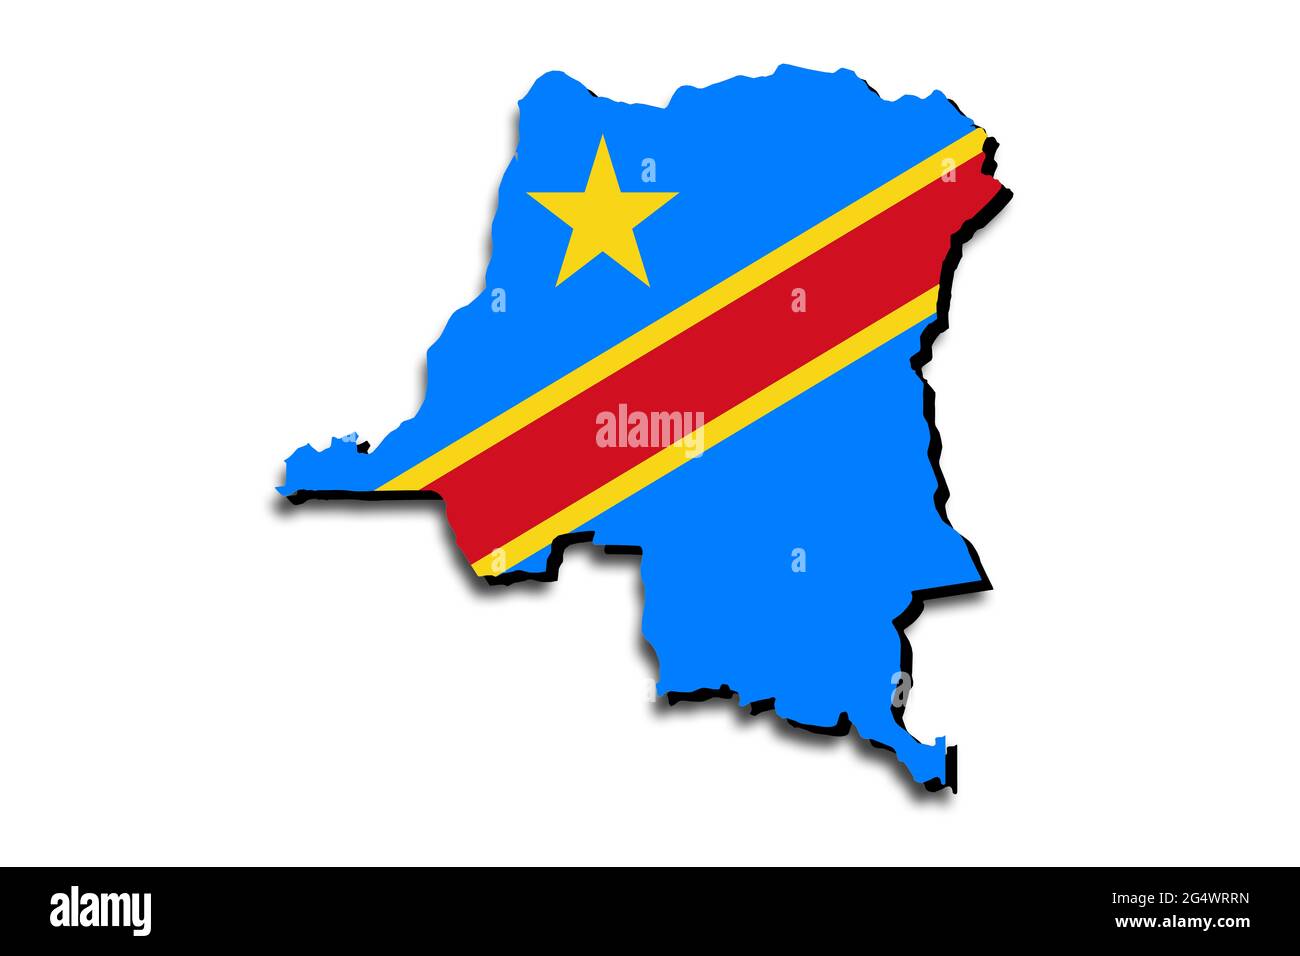 Outline map of Democratic Republic of Congo with the national flag superimposed over the country. 3D graphics casting a shadow on the white background Stock Photo